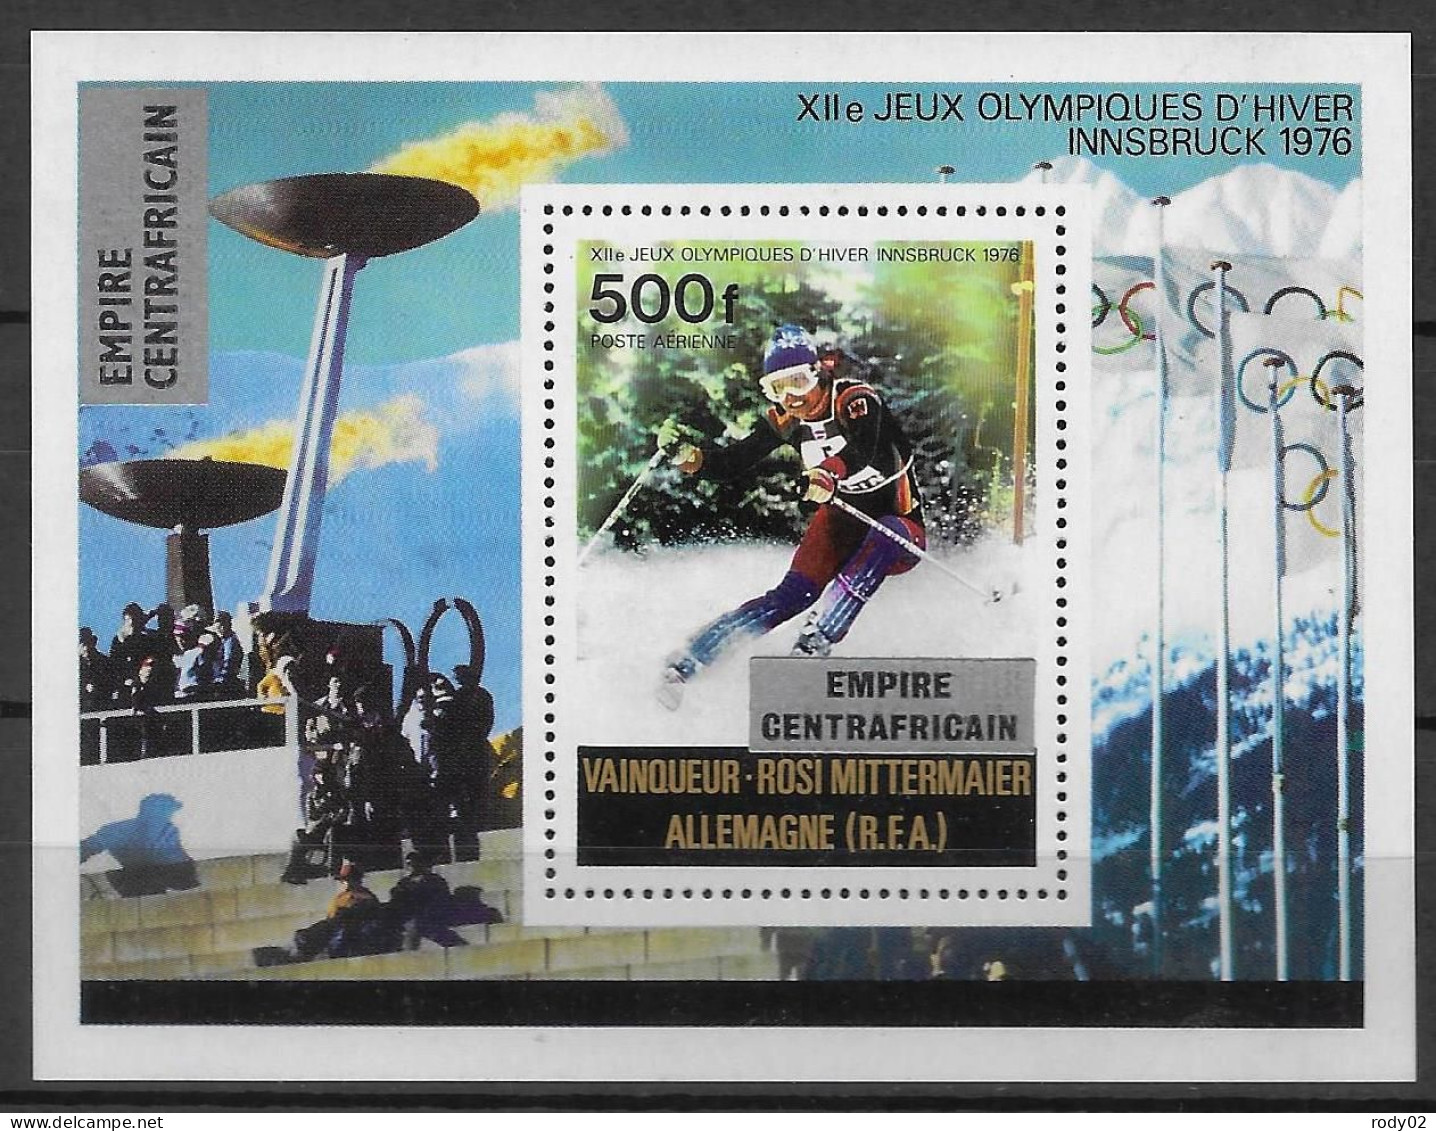 CENTRAFRIQUE - JEUX OLYMPIQUES D'HIVER A INNSBRUCK  - N° 297 ET 298, PA 175 A 177 ET BF 17 - NEUF** MNH - Invierno 1976: Innsbruck